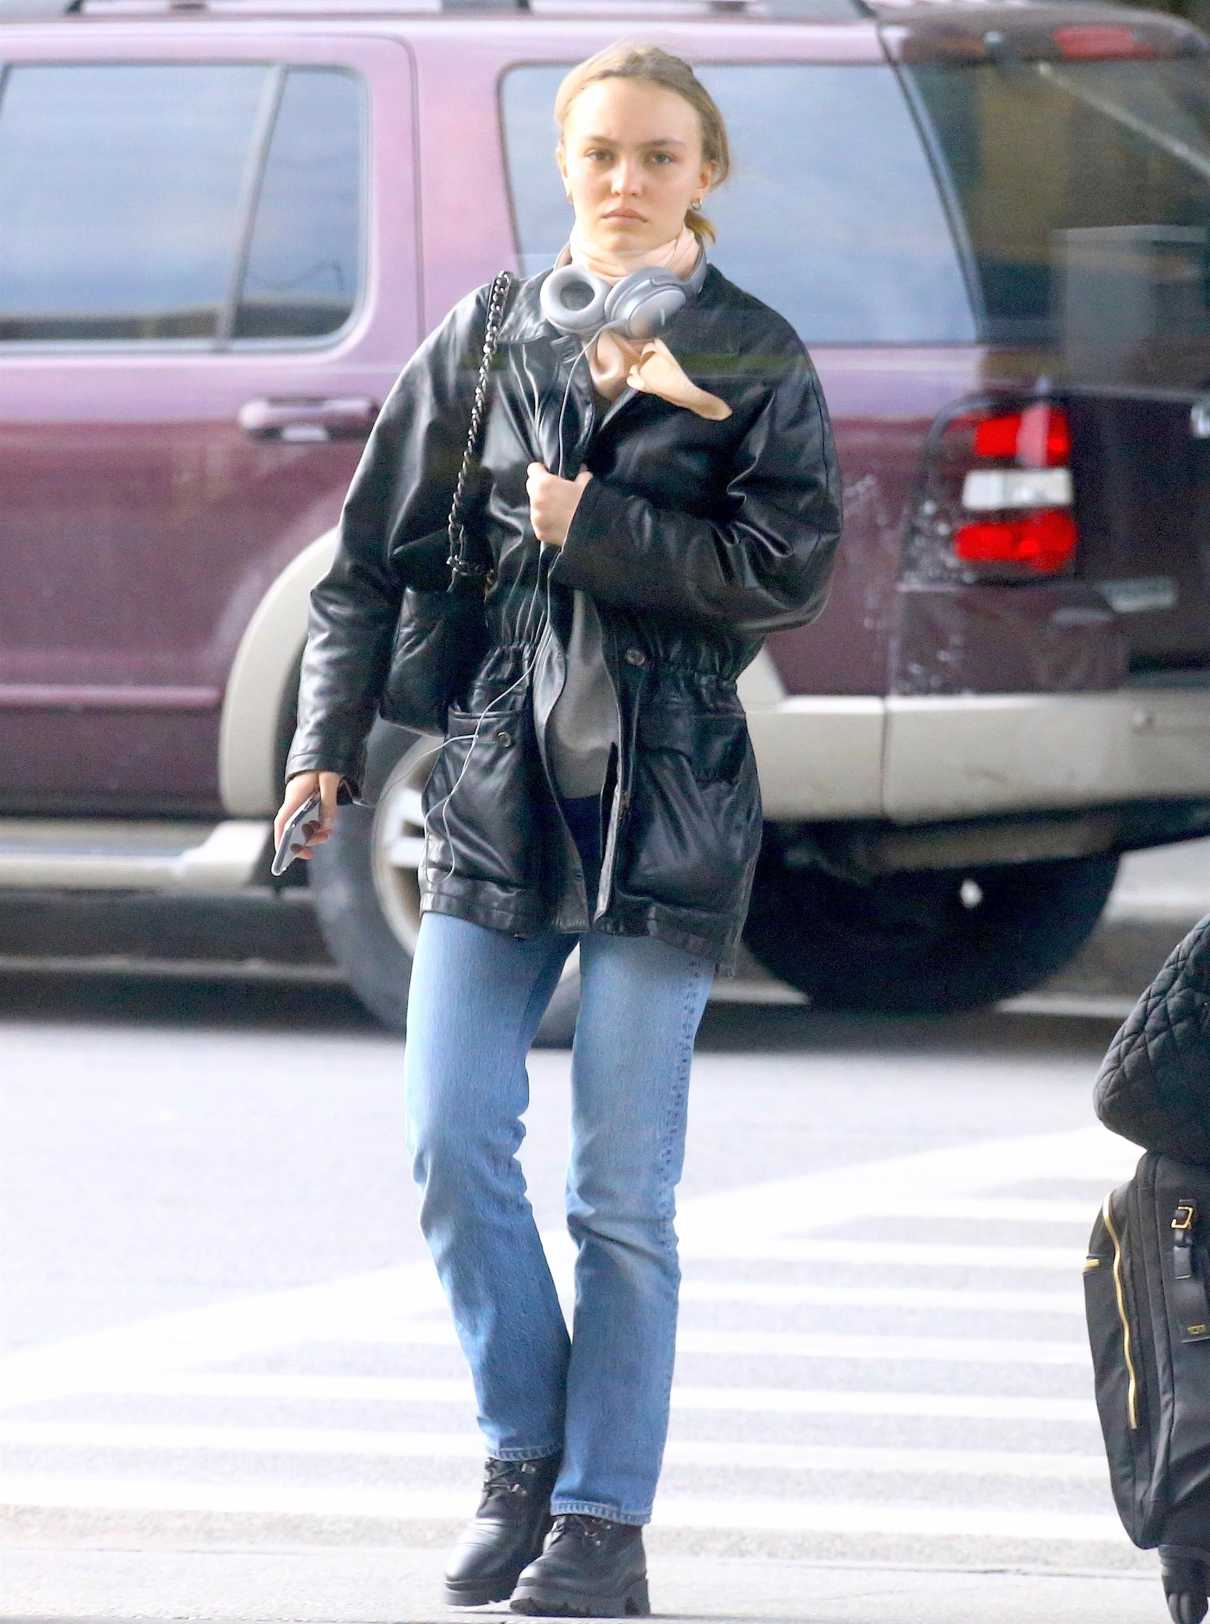 Lily Rose Depp In A Black Leather Jacket Leaves Jfk Airport In New York 12 06 2019 Lacelebs Co